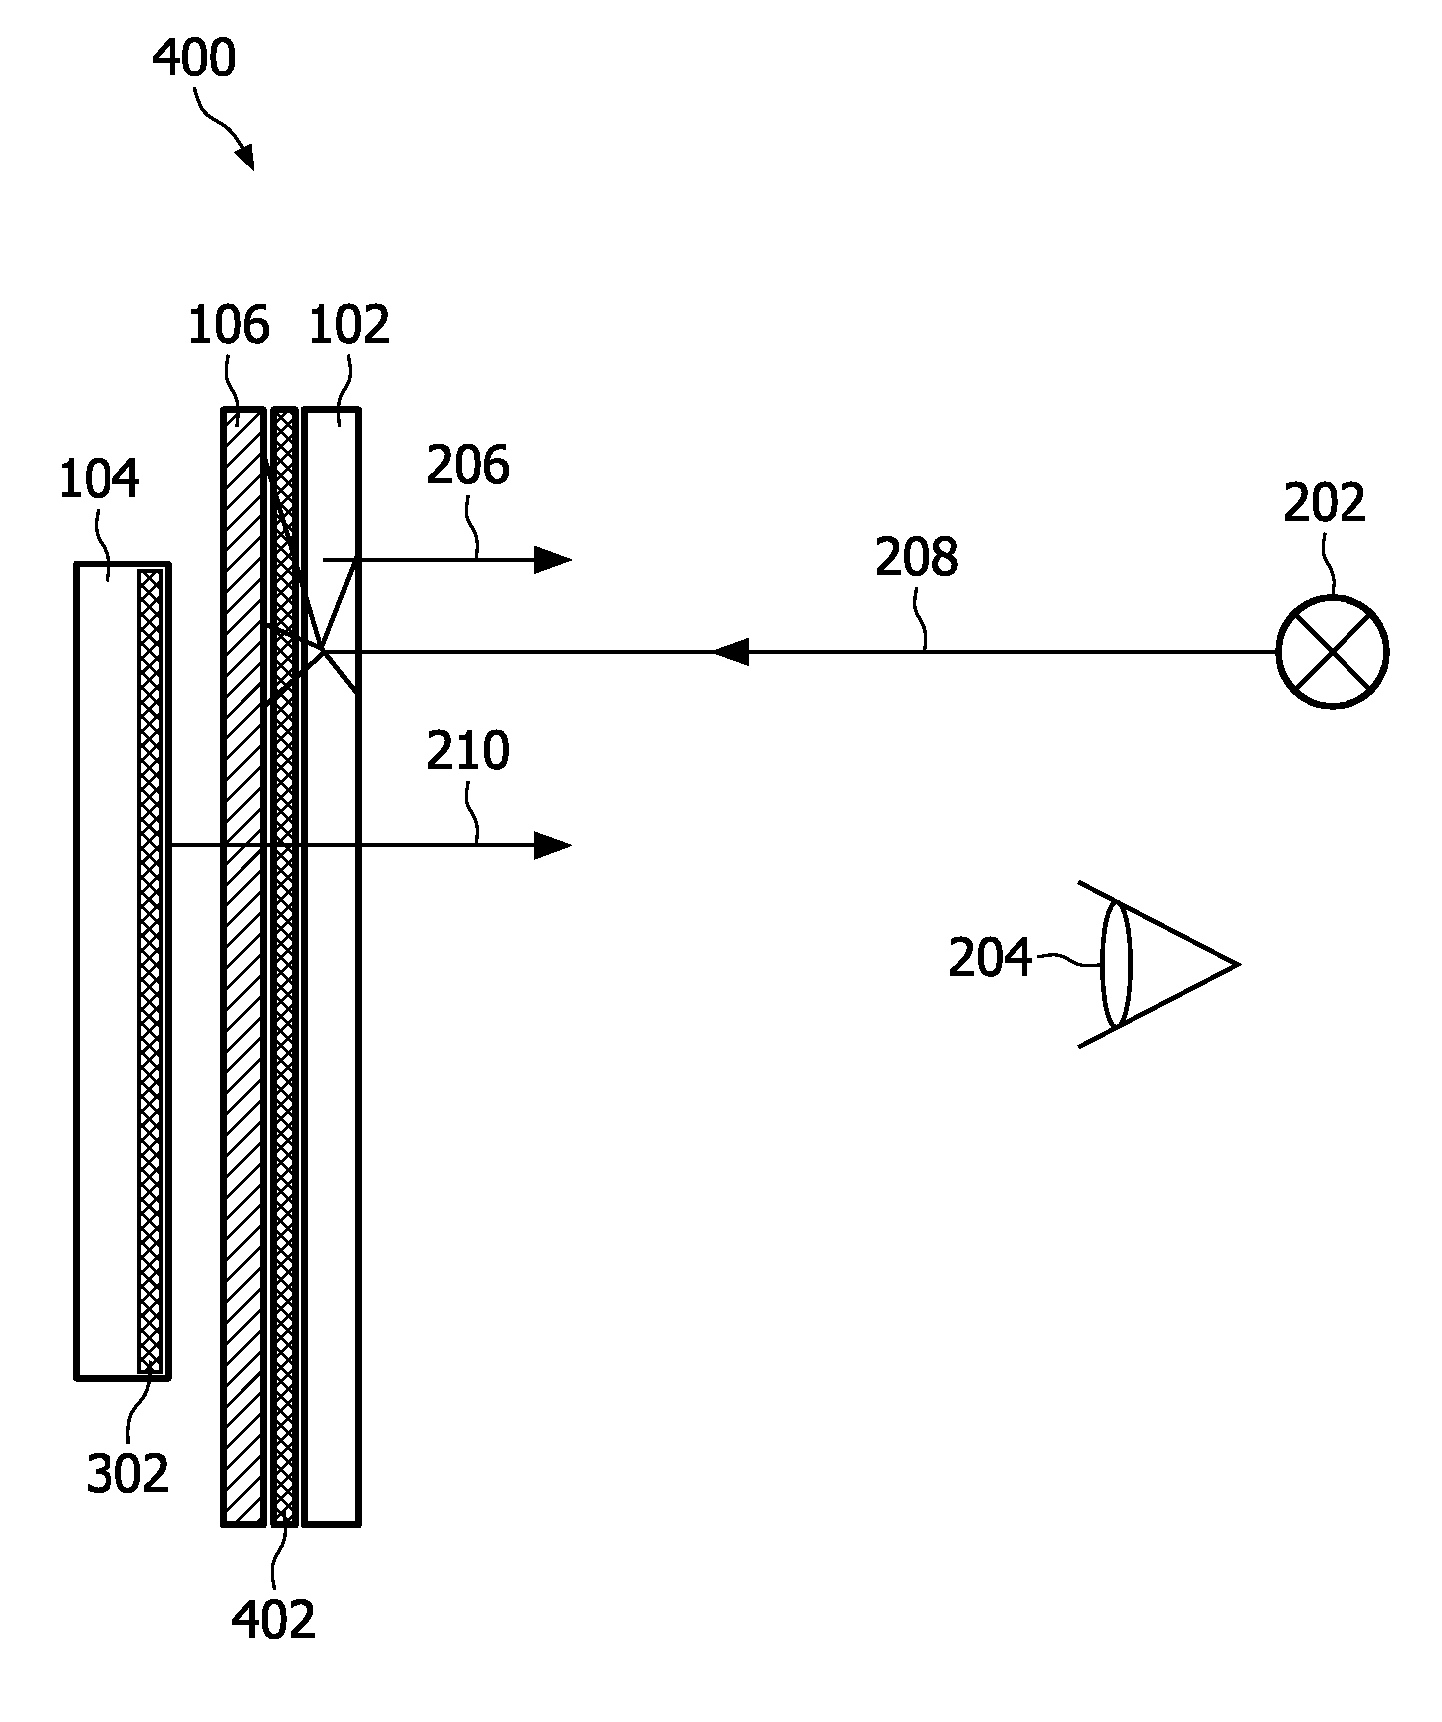 Image display apparatus, and disguising device